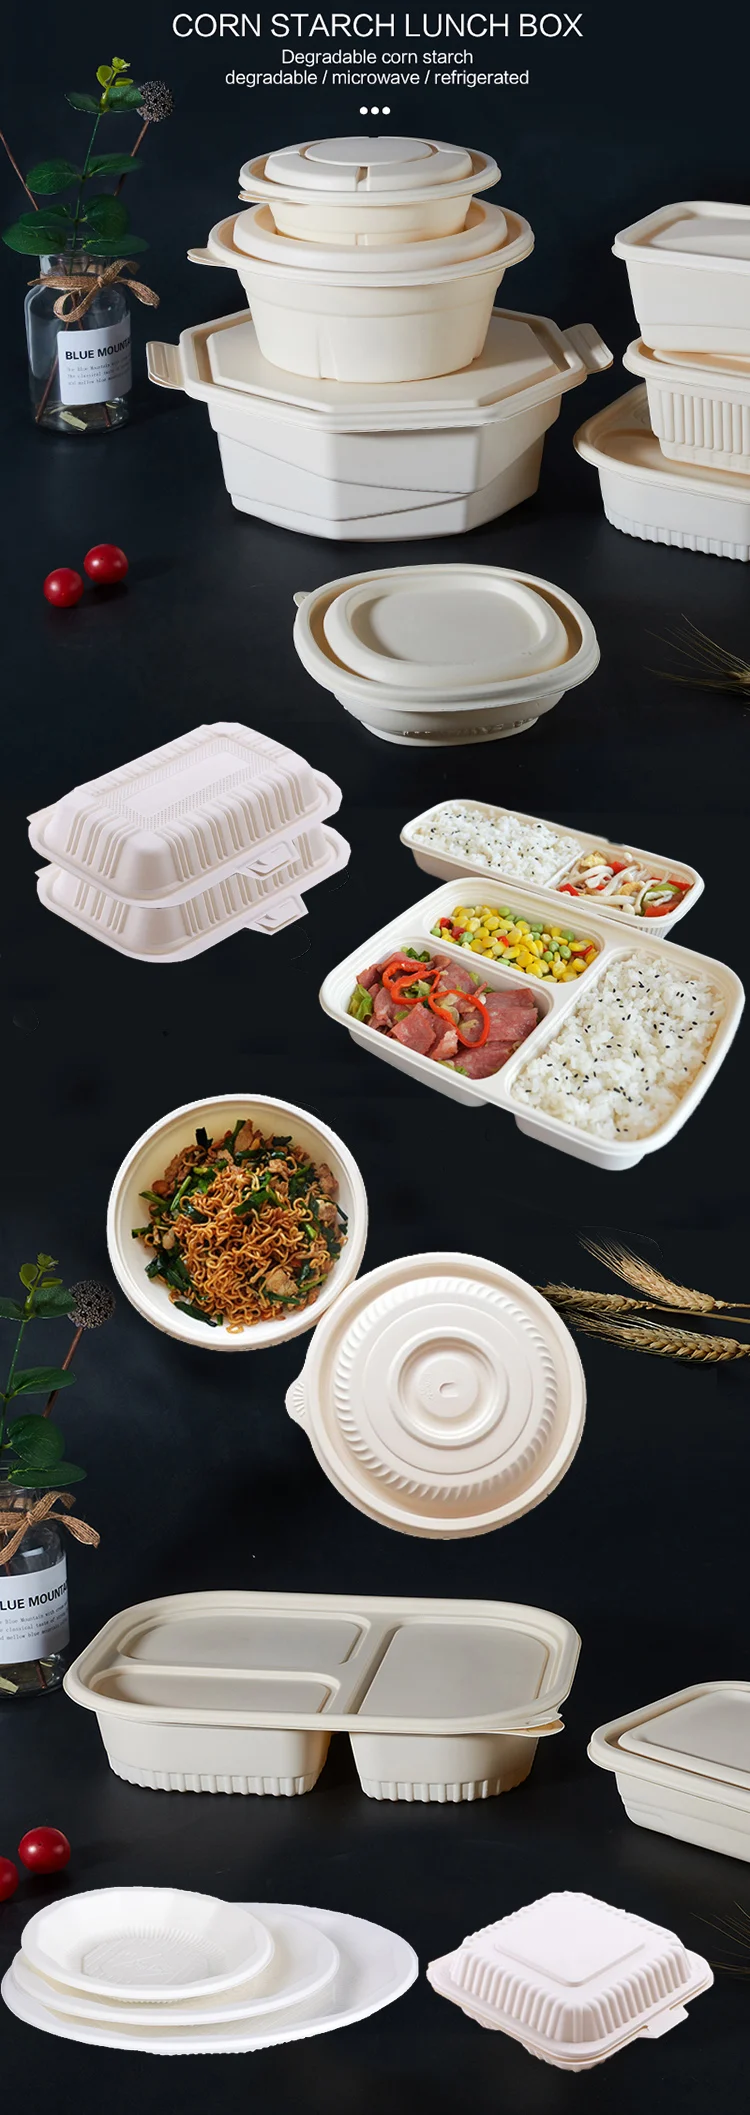 Leak Proof Food Containers Biodegradable Take Out Eco